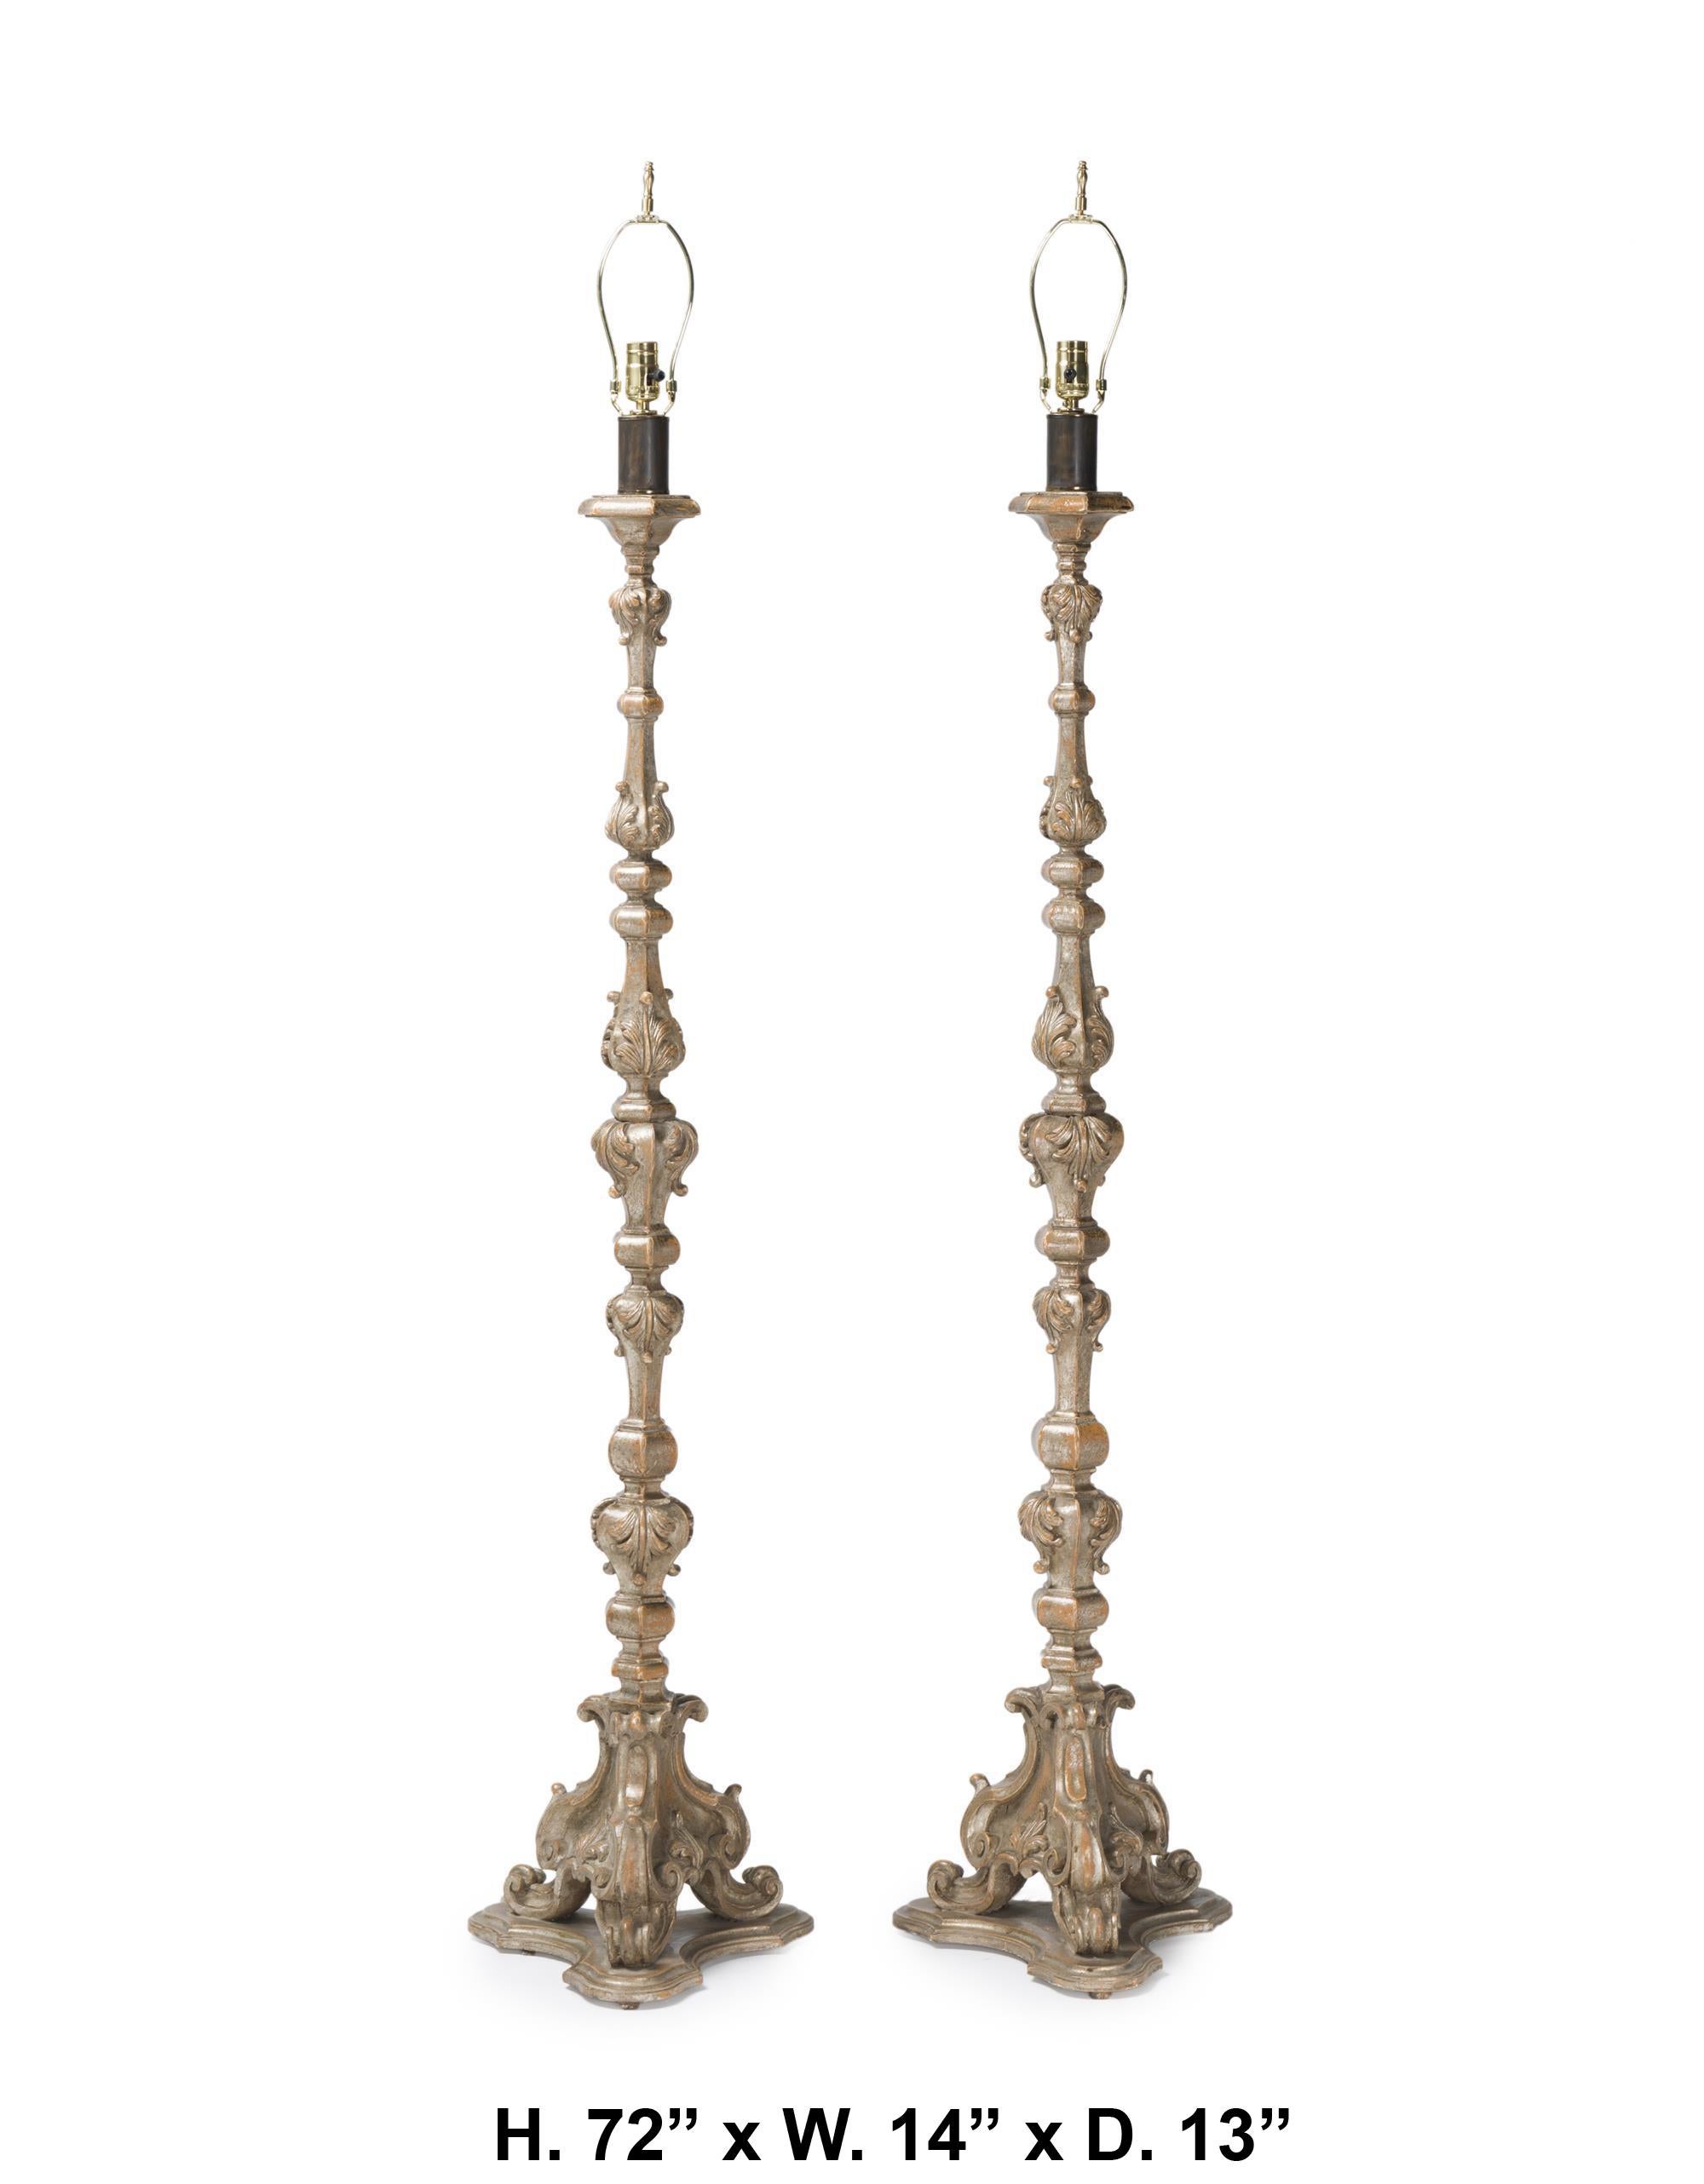 Lovely pair Italian Neoclassical style carved silver-leafed wood floor lamps
Third quarter 20th century 
shade are not included
Each: 72